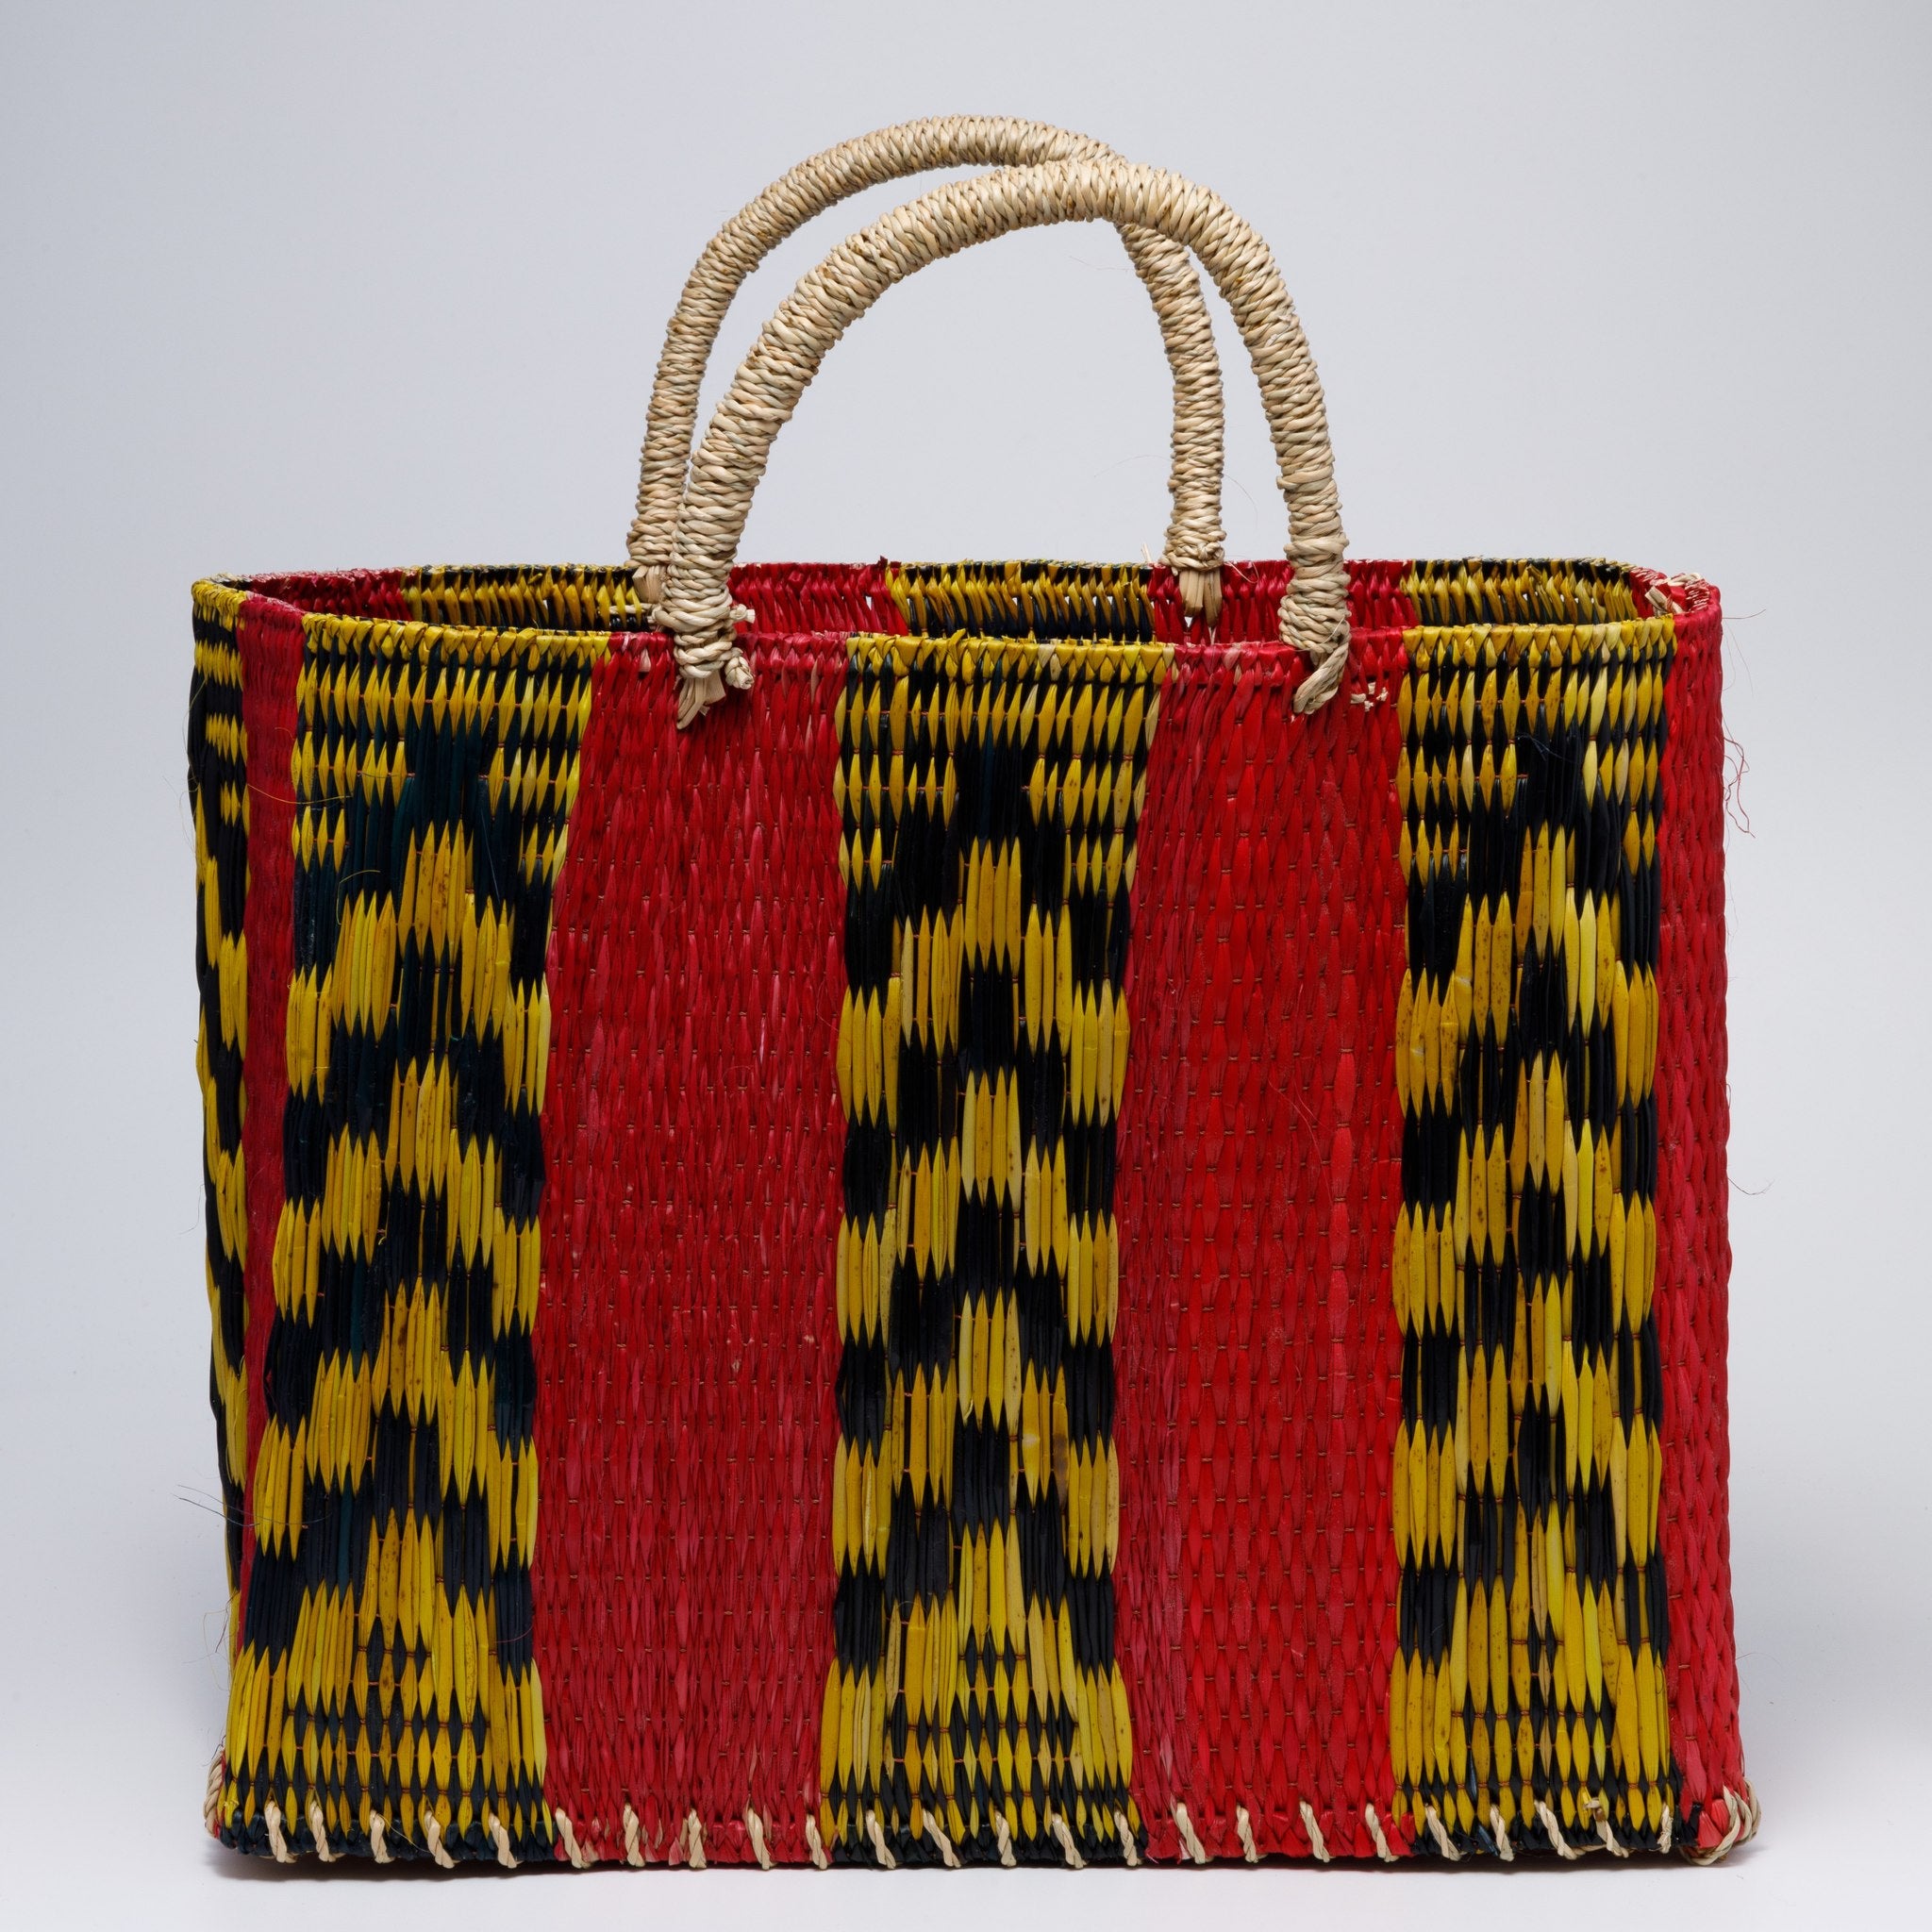 Buy Mexican Handicraft Bag, Handmade Bag From Mexico. Wholesale TOO Beach Bag  Online in India - Etsy